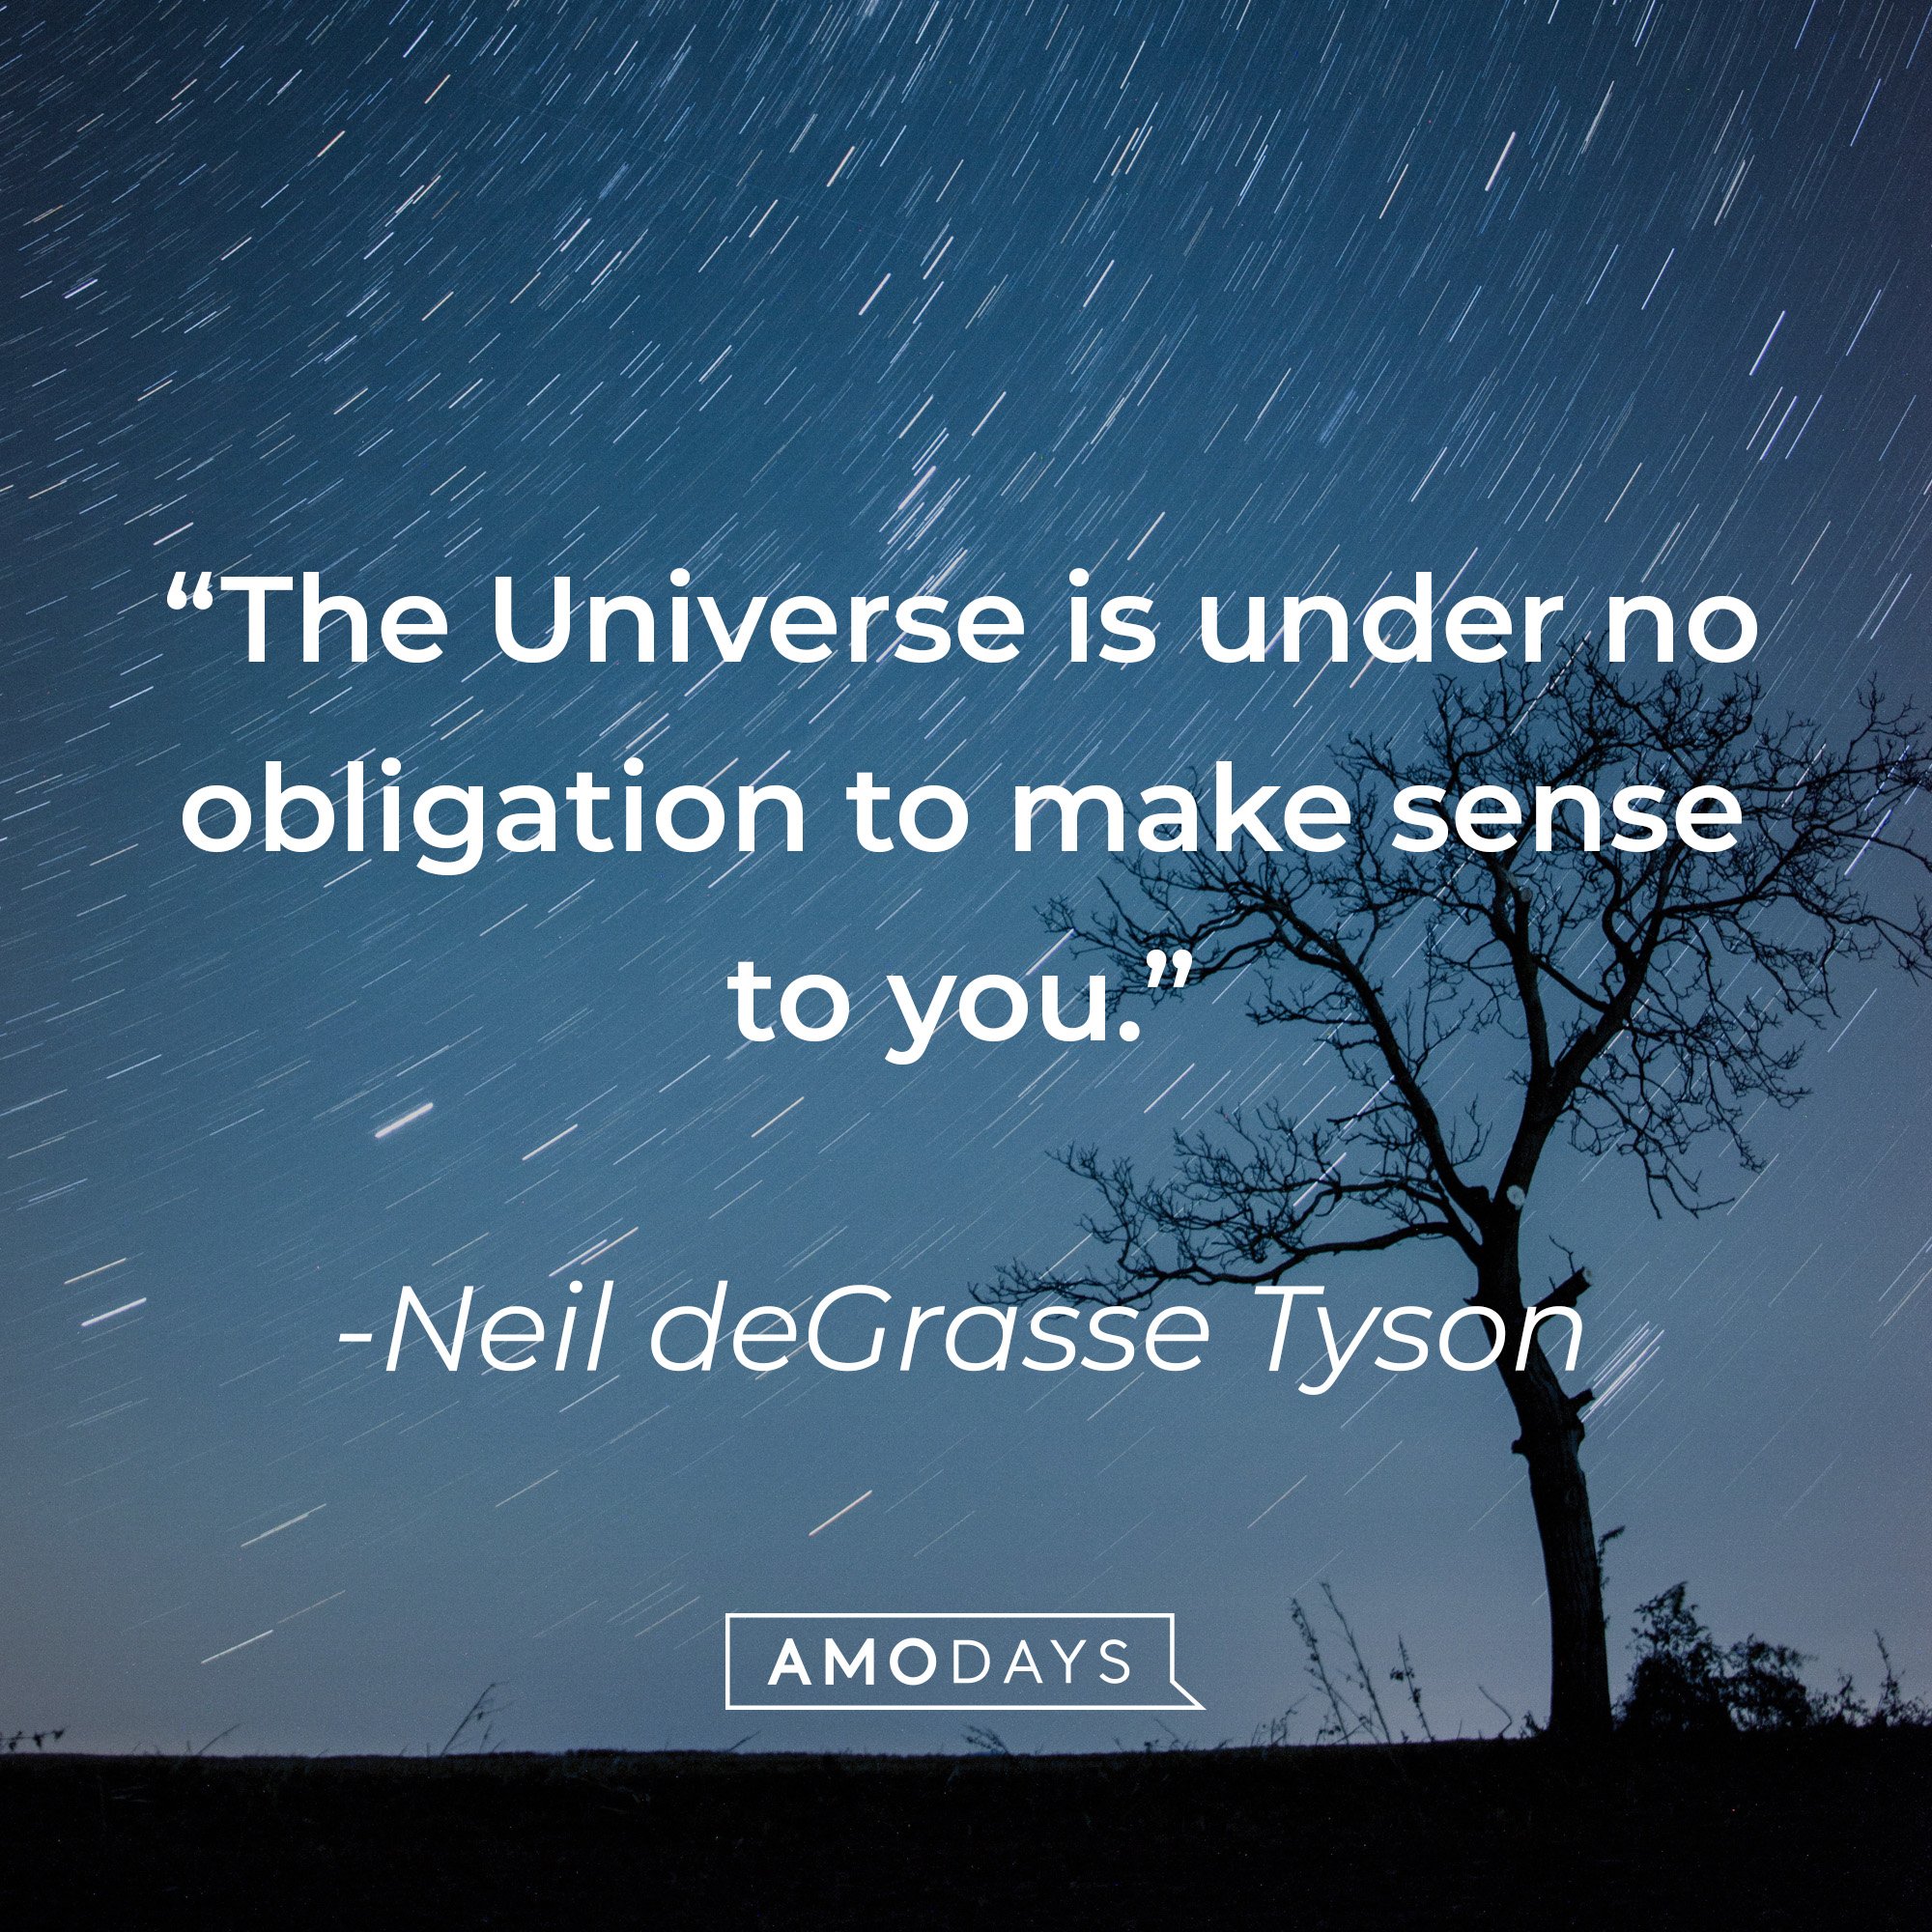 Neil deGrasse Tyson’s quote: “The Universe is under no obligation to make sense to you.” | Image: AmoDays